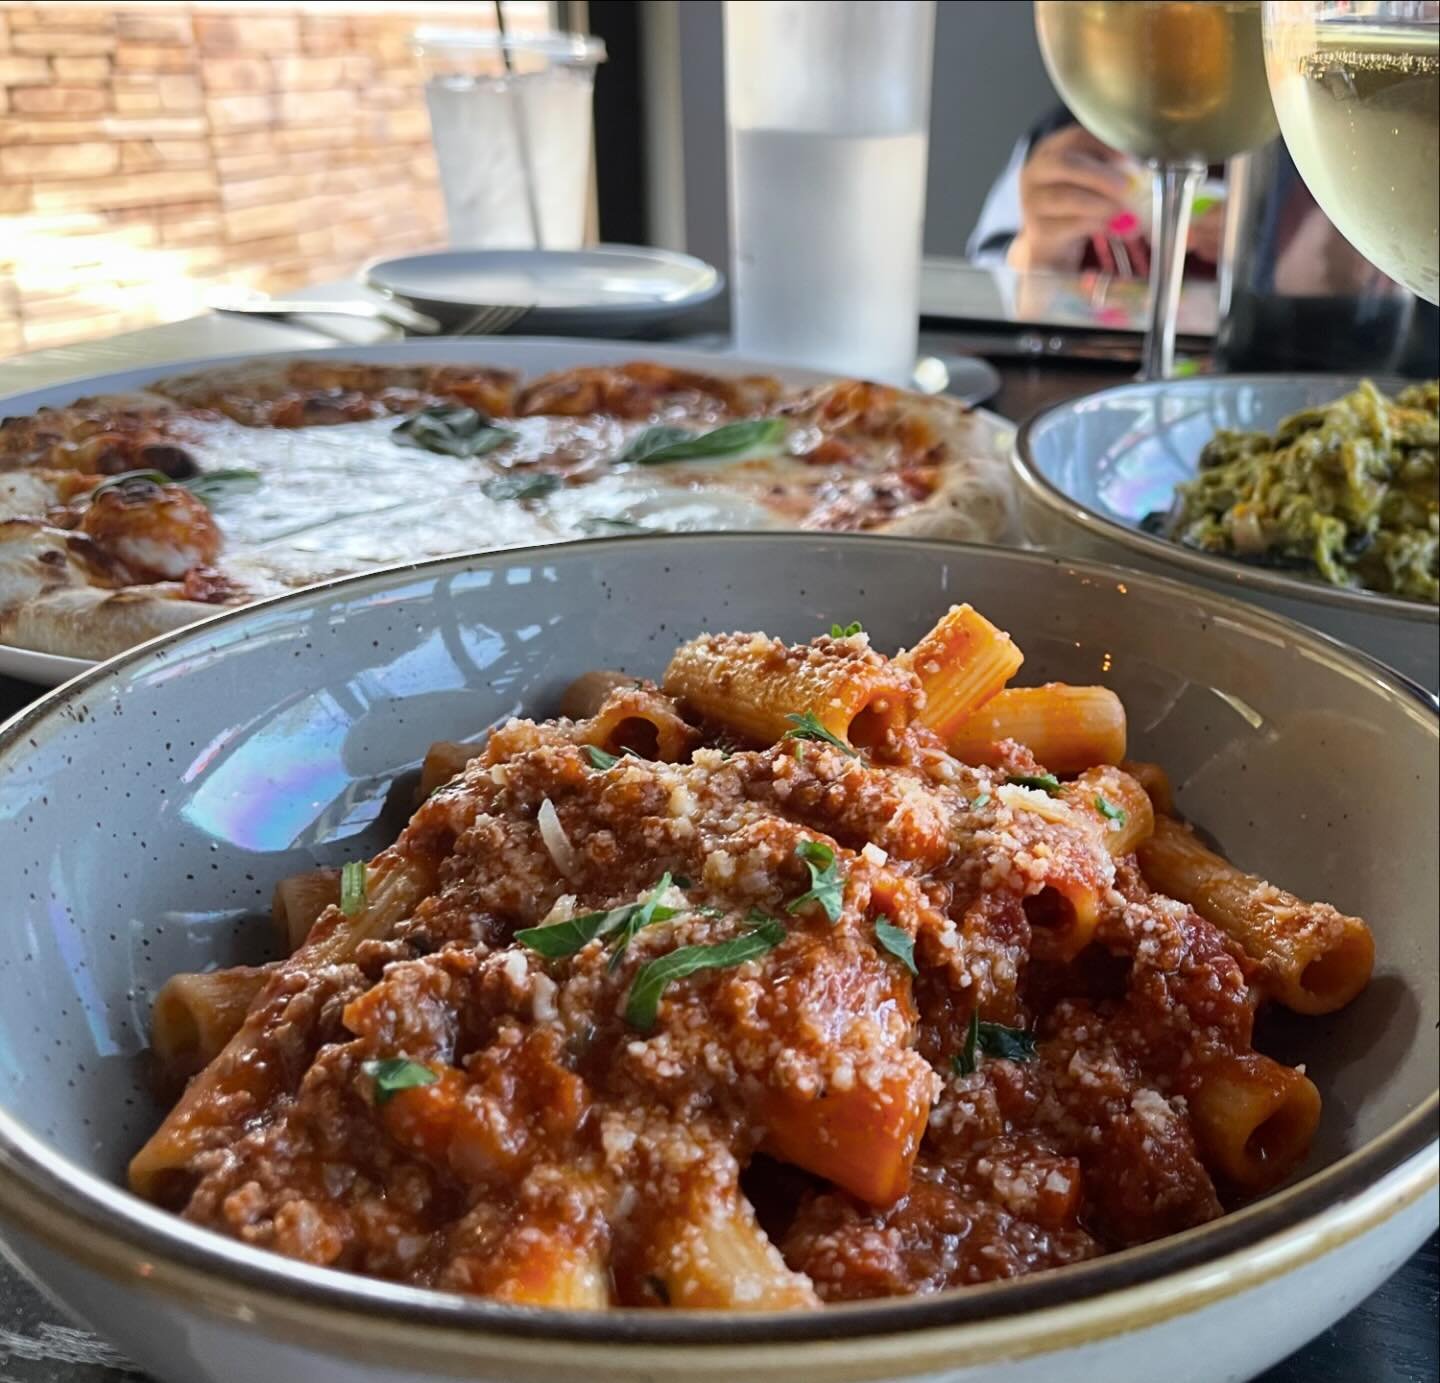 Since we opened almost 5 years ago, the Rigatoni Bolognese has been a staple of the Locale menu. If you haven&rsquo;t had yet, you are missing out!